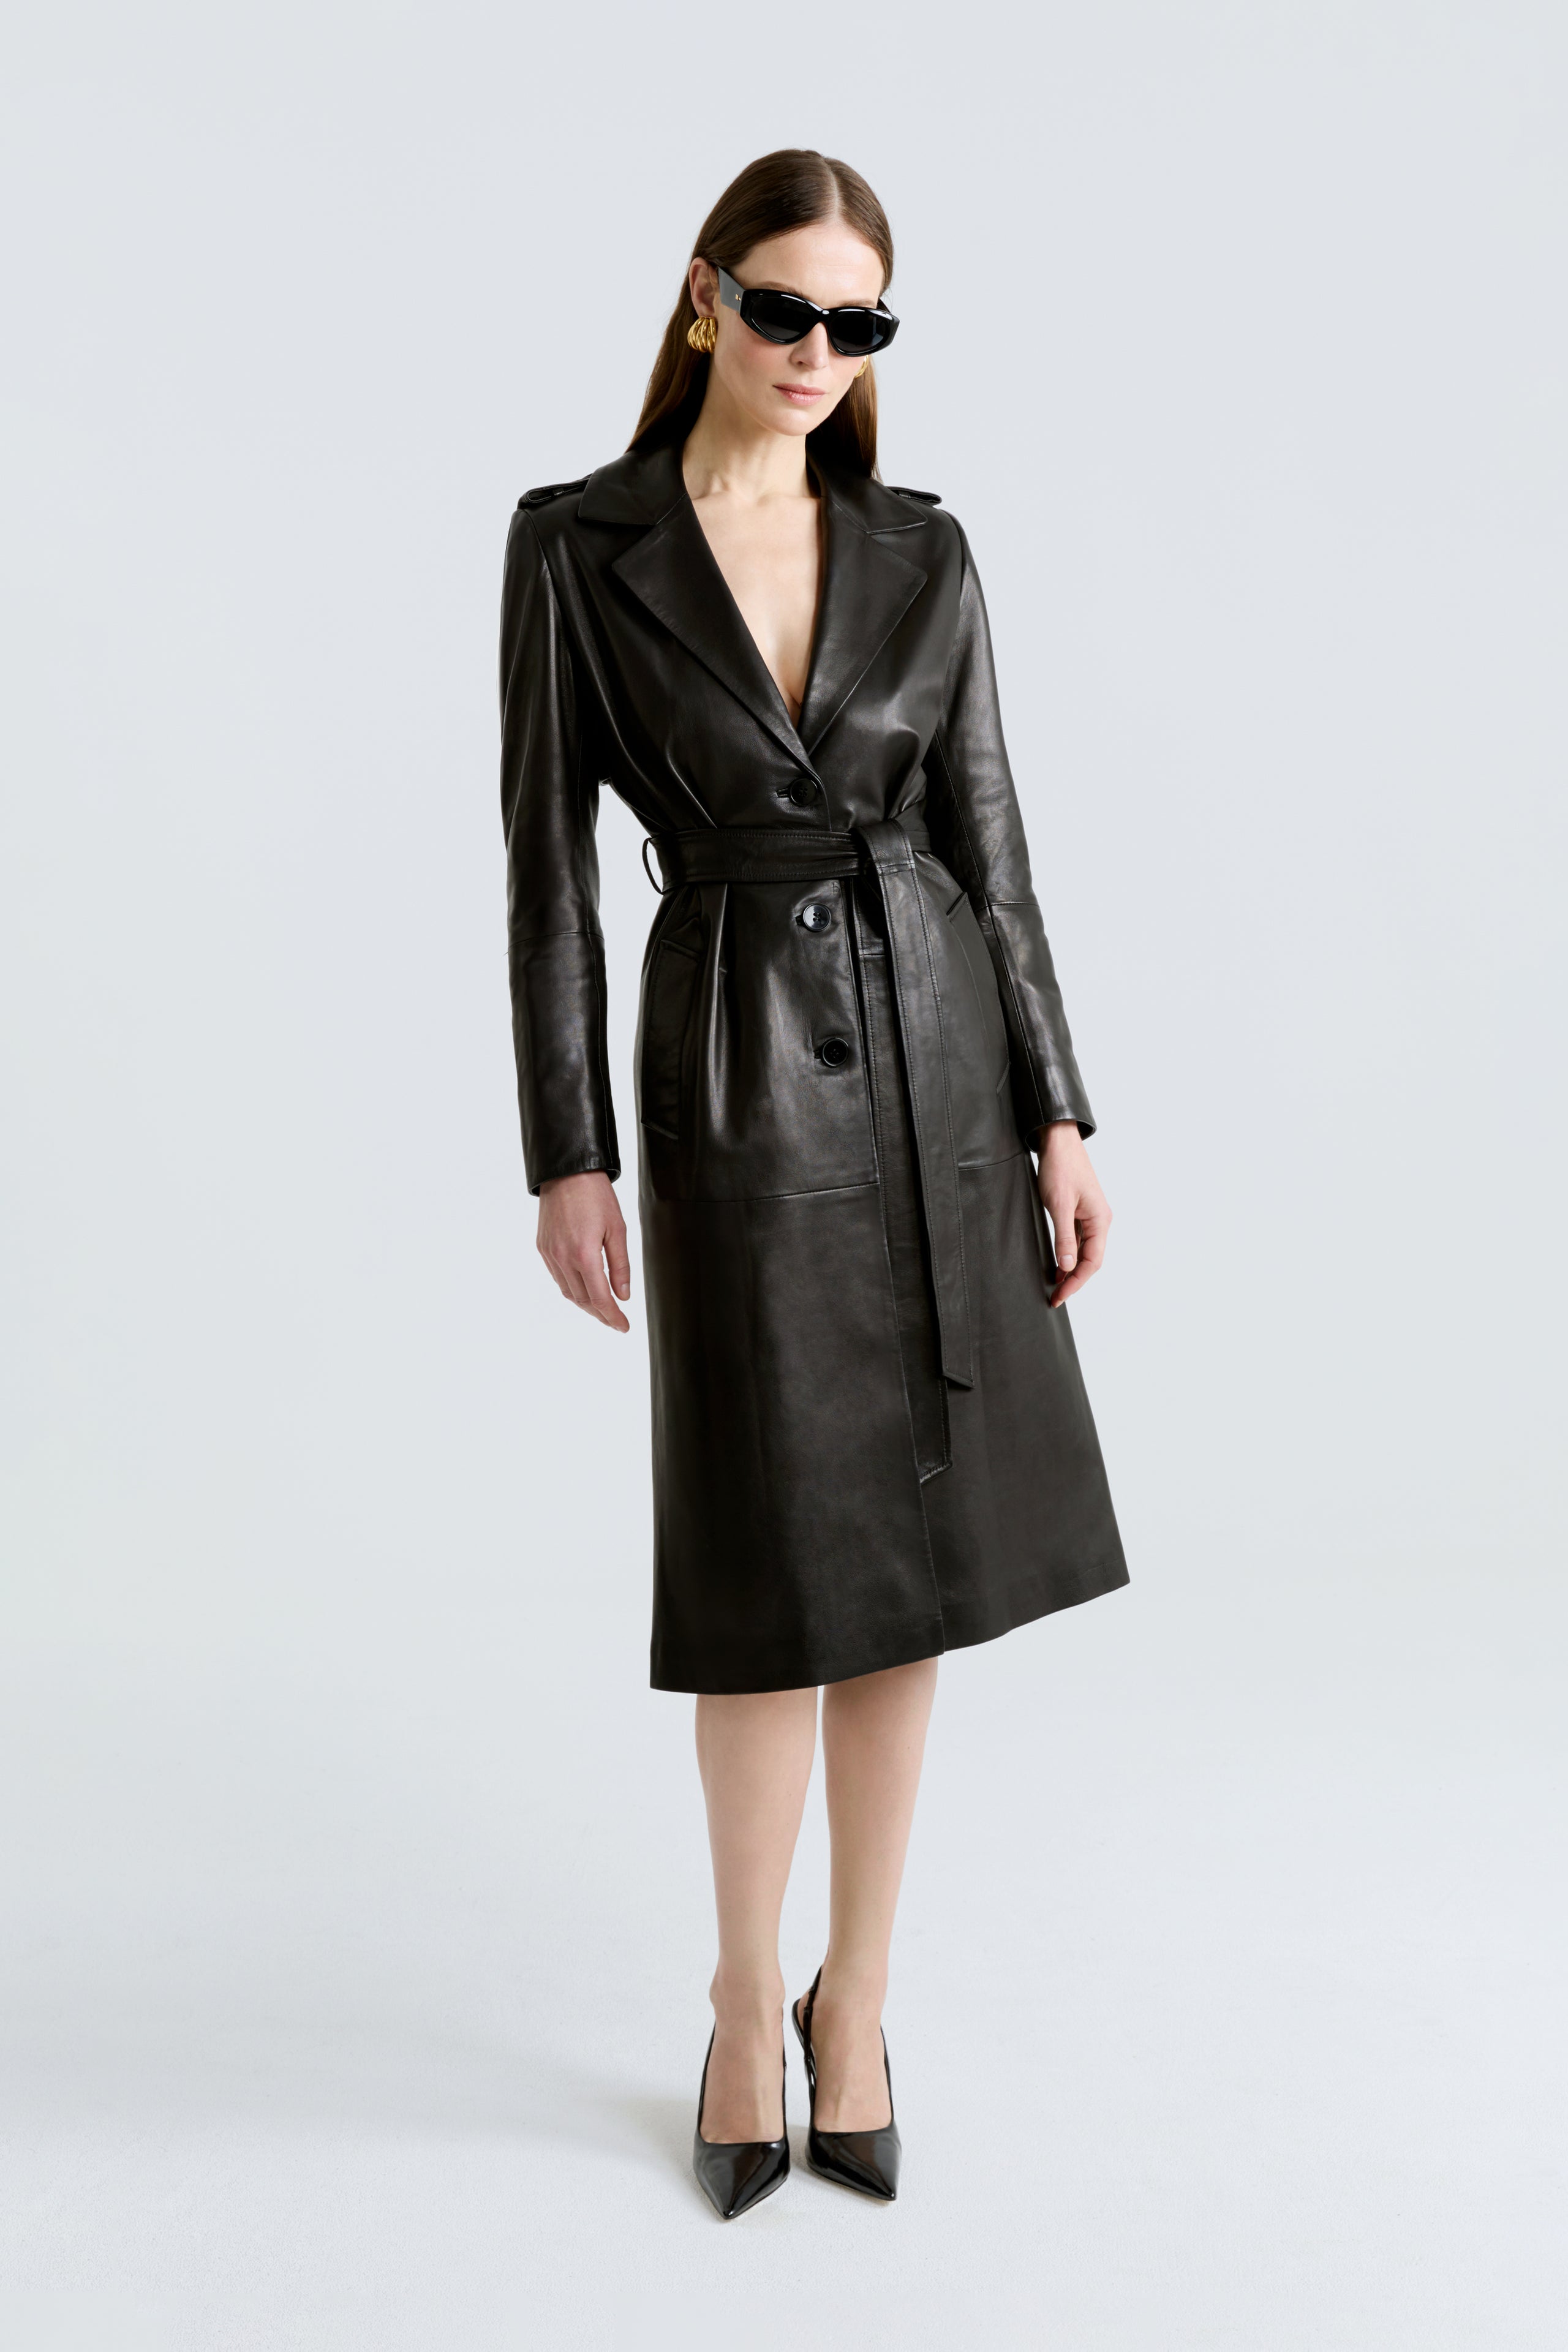 Model is wearing the Marla Black Belted Leather Coat Front